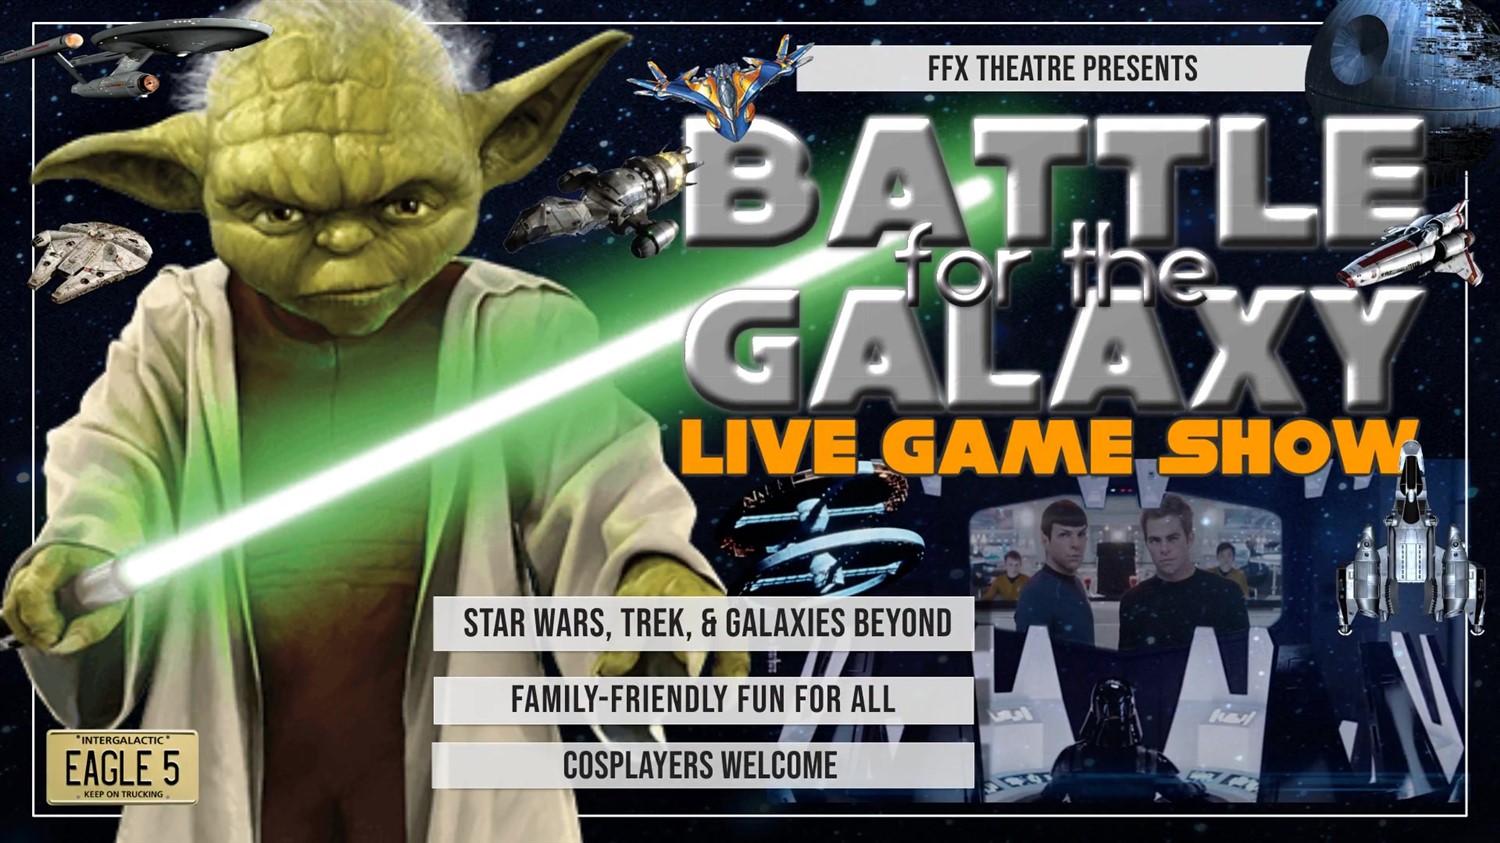 Battle for the Galaxy: Live Game Show  on feb. 26, 19:00@FFX Theatre - Buy tickets and Get information on Family Fun Xperience tickets.ffxshow.org